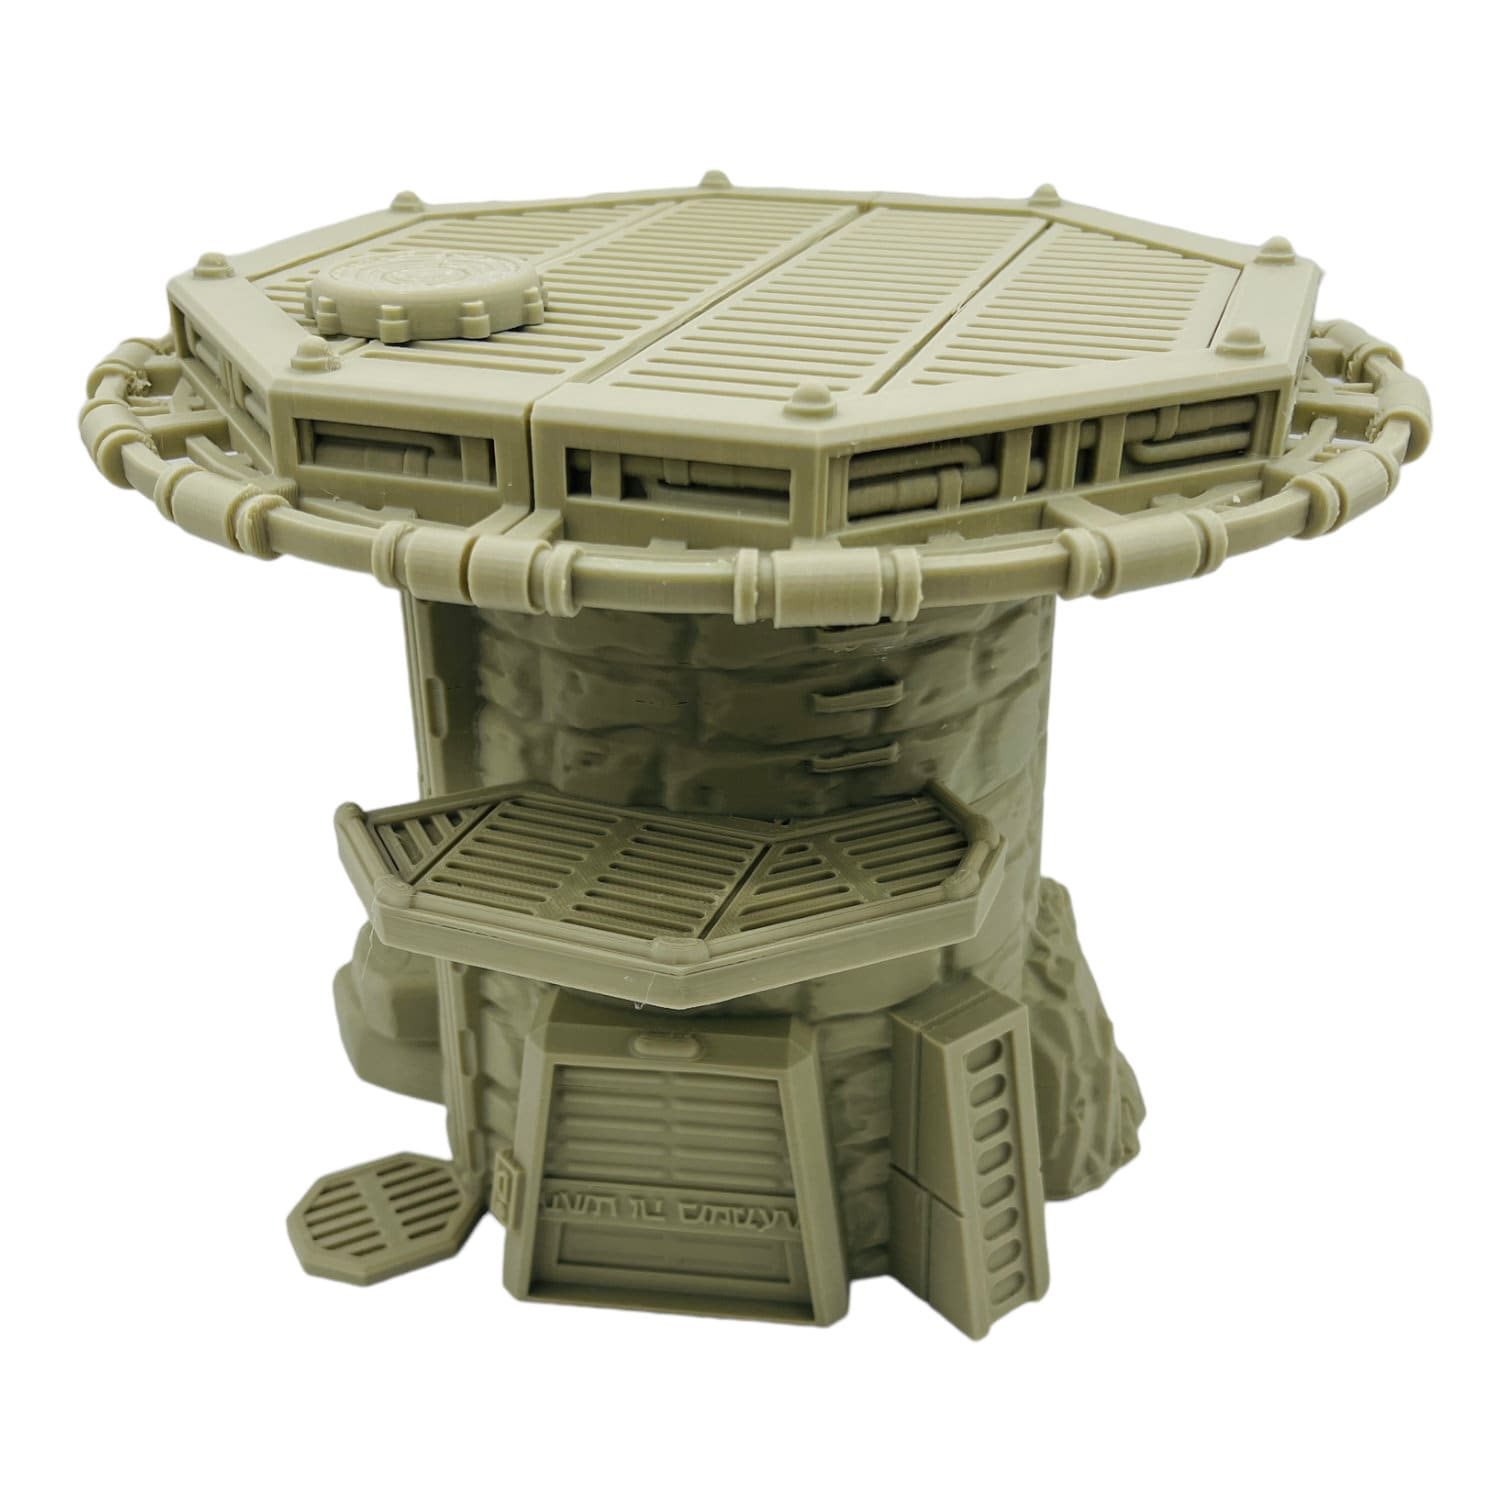 Ancient Starport Landing Pad/ Multiverse / Ancient / Legion and Sci-Fi 3D printed tabletop terrain for wargames / Licensed Printer